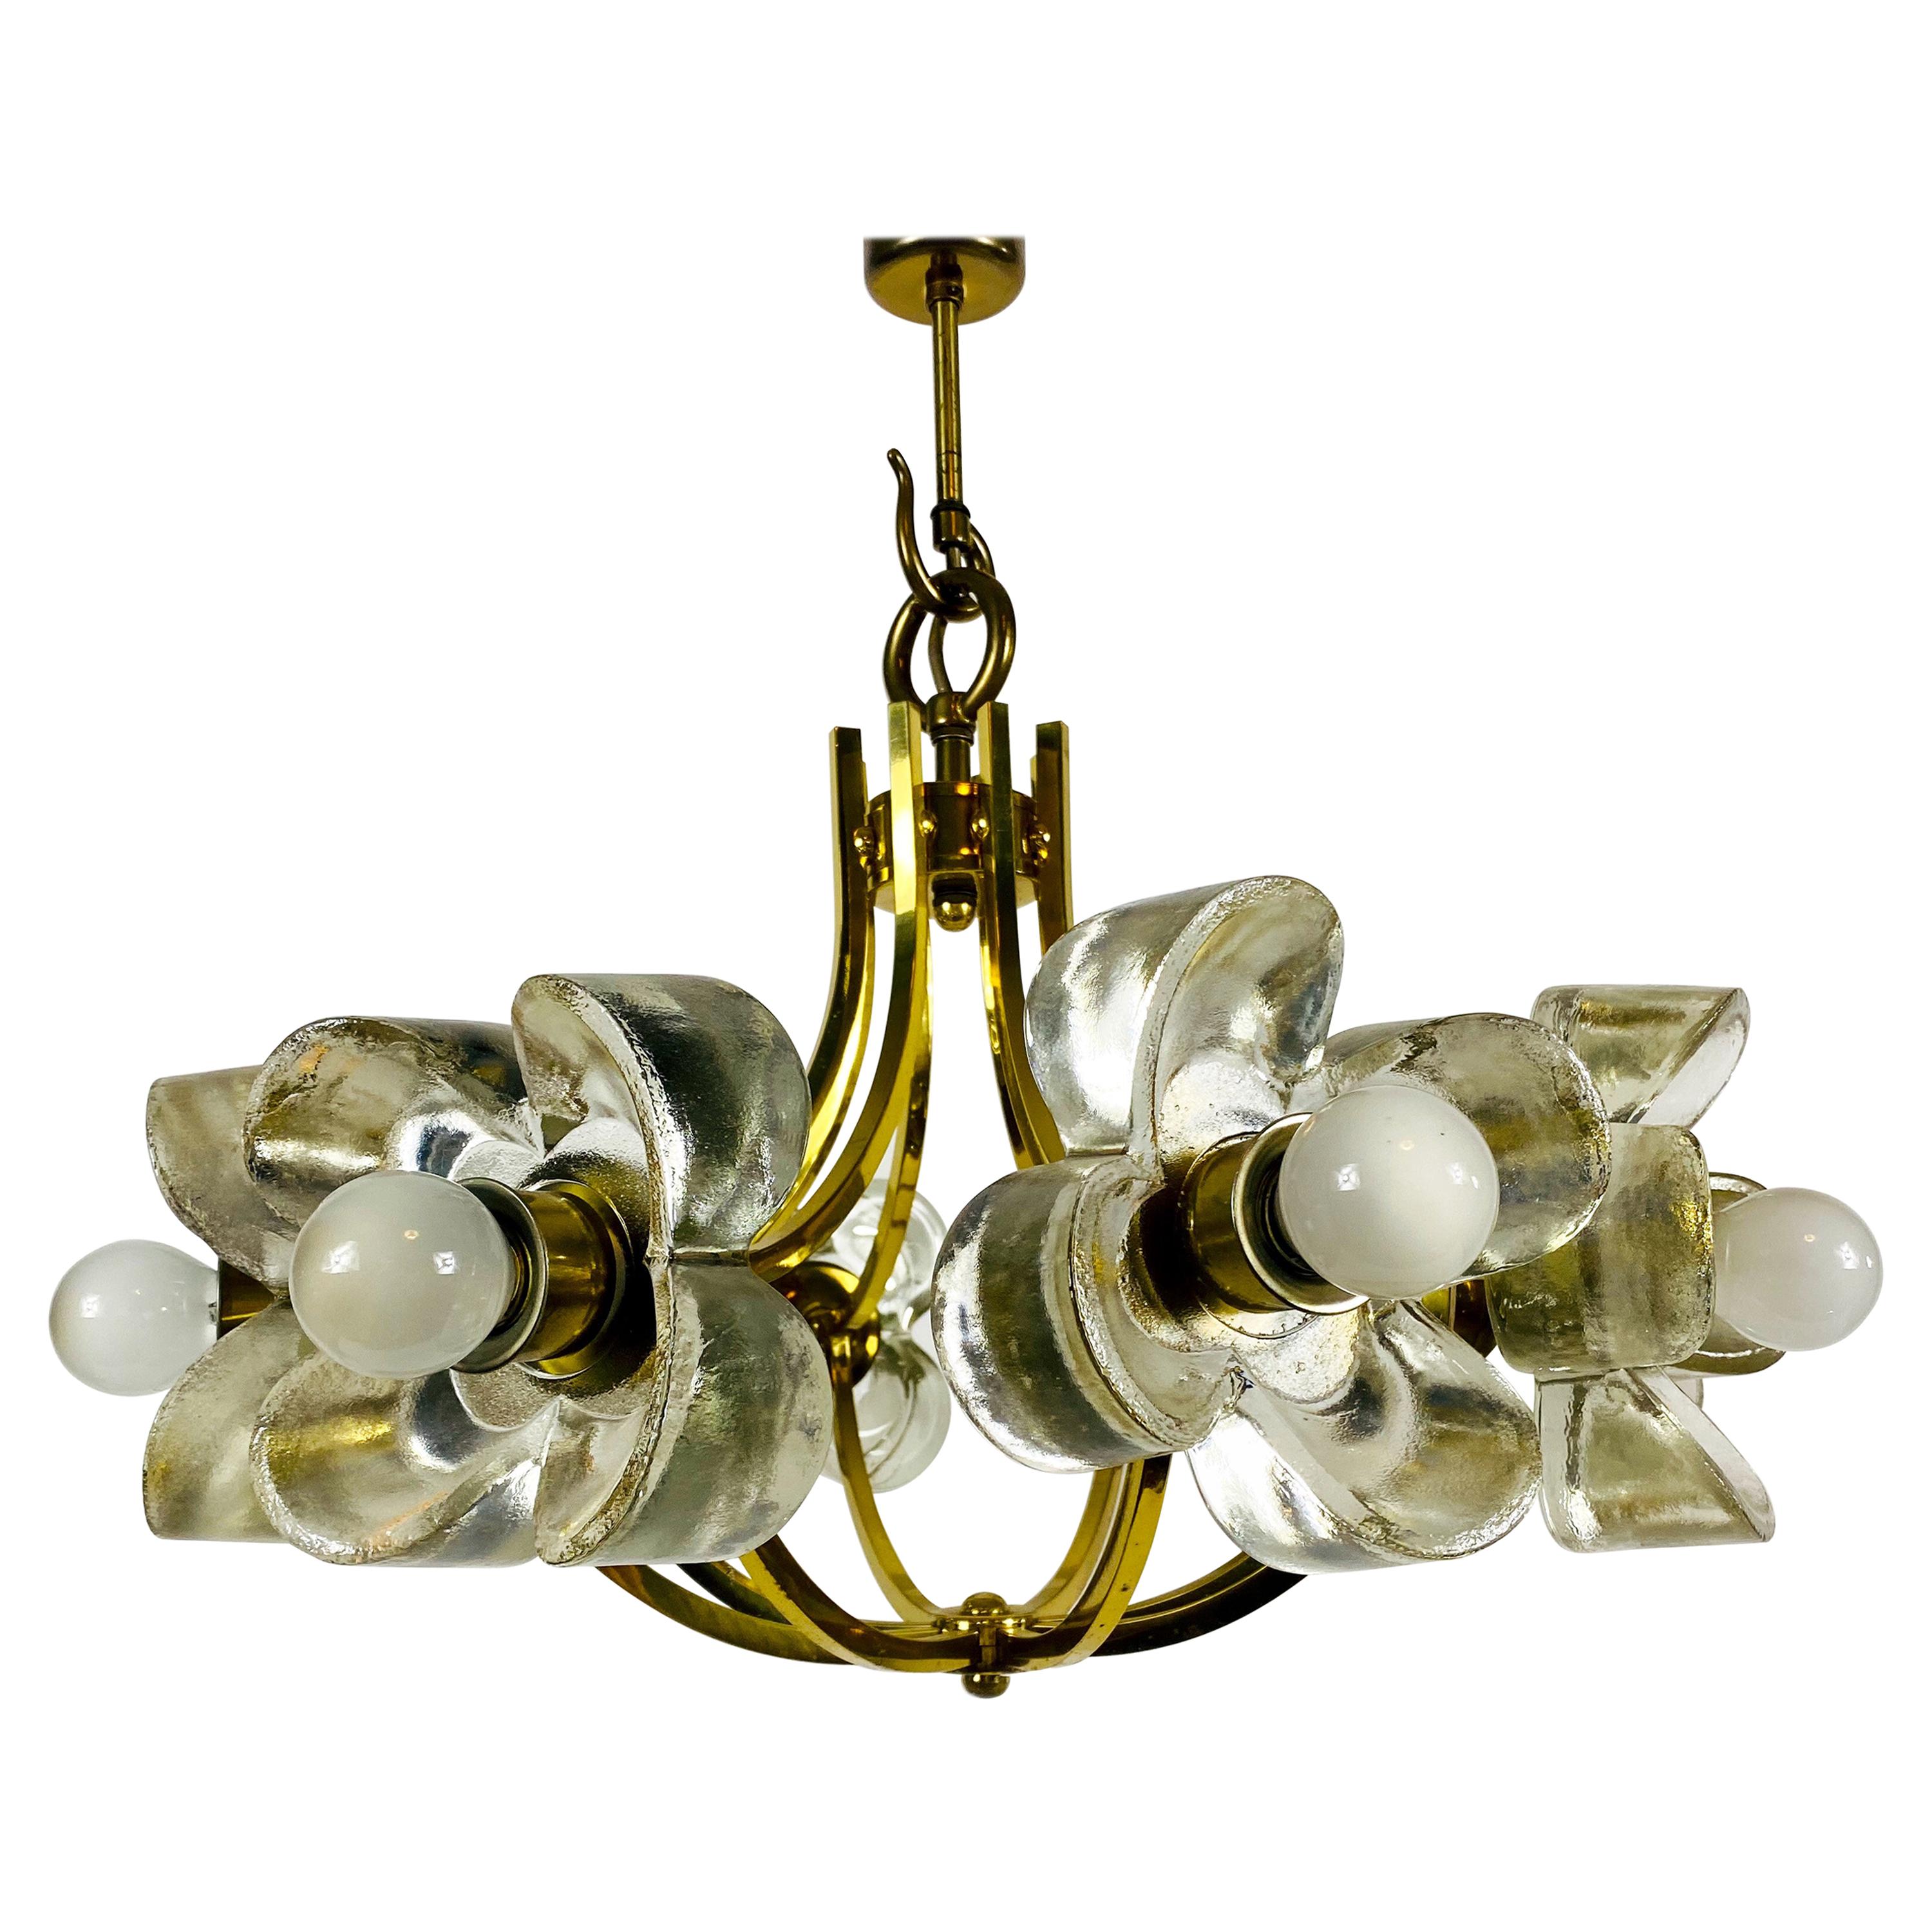 Italian Midcentury Glass and Brass 8-Arm Chandelier Mazzega Attributed, 1960s For Sale